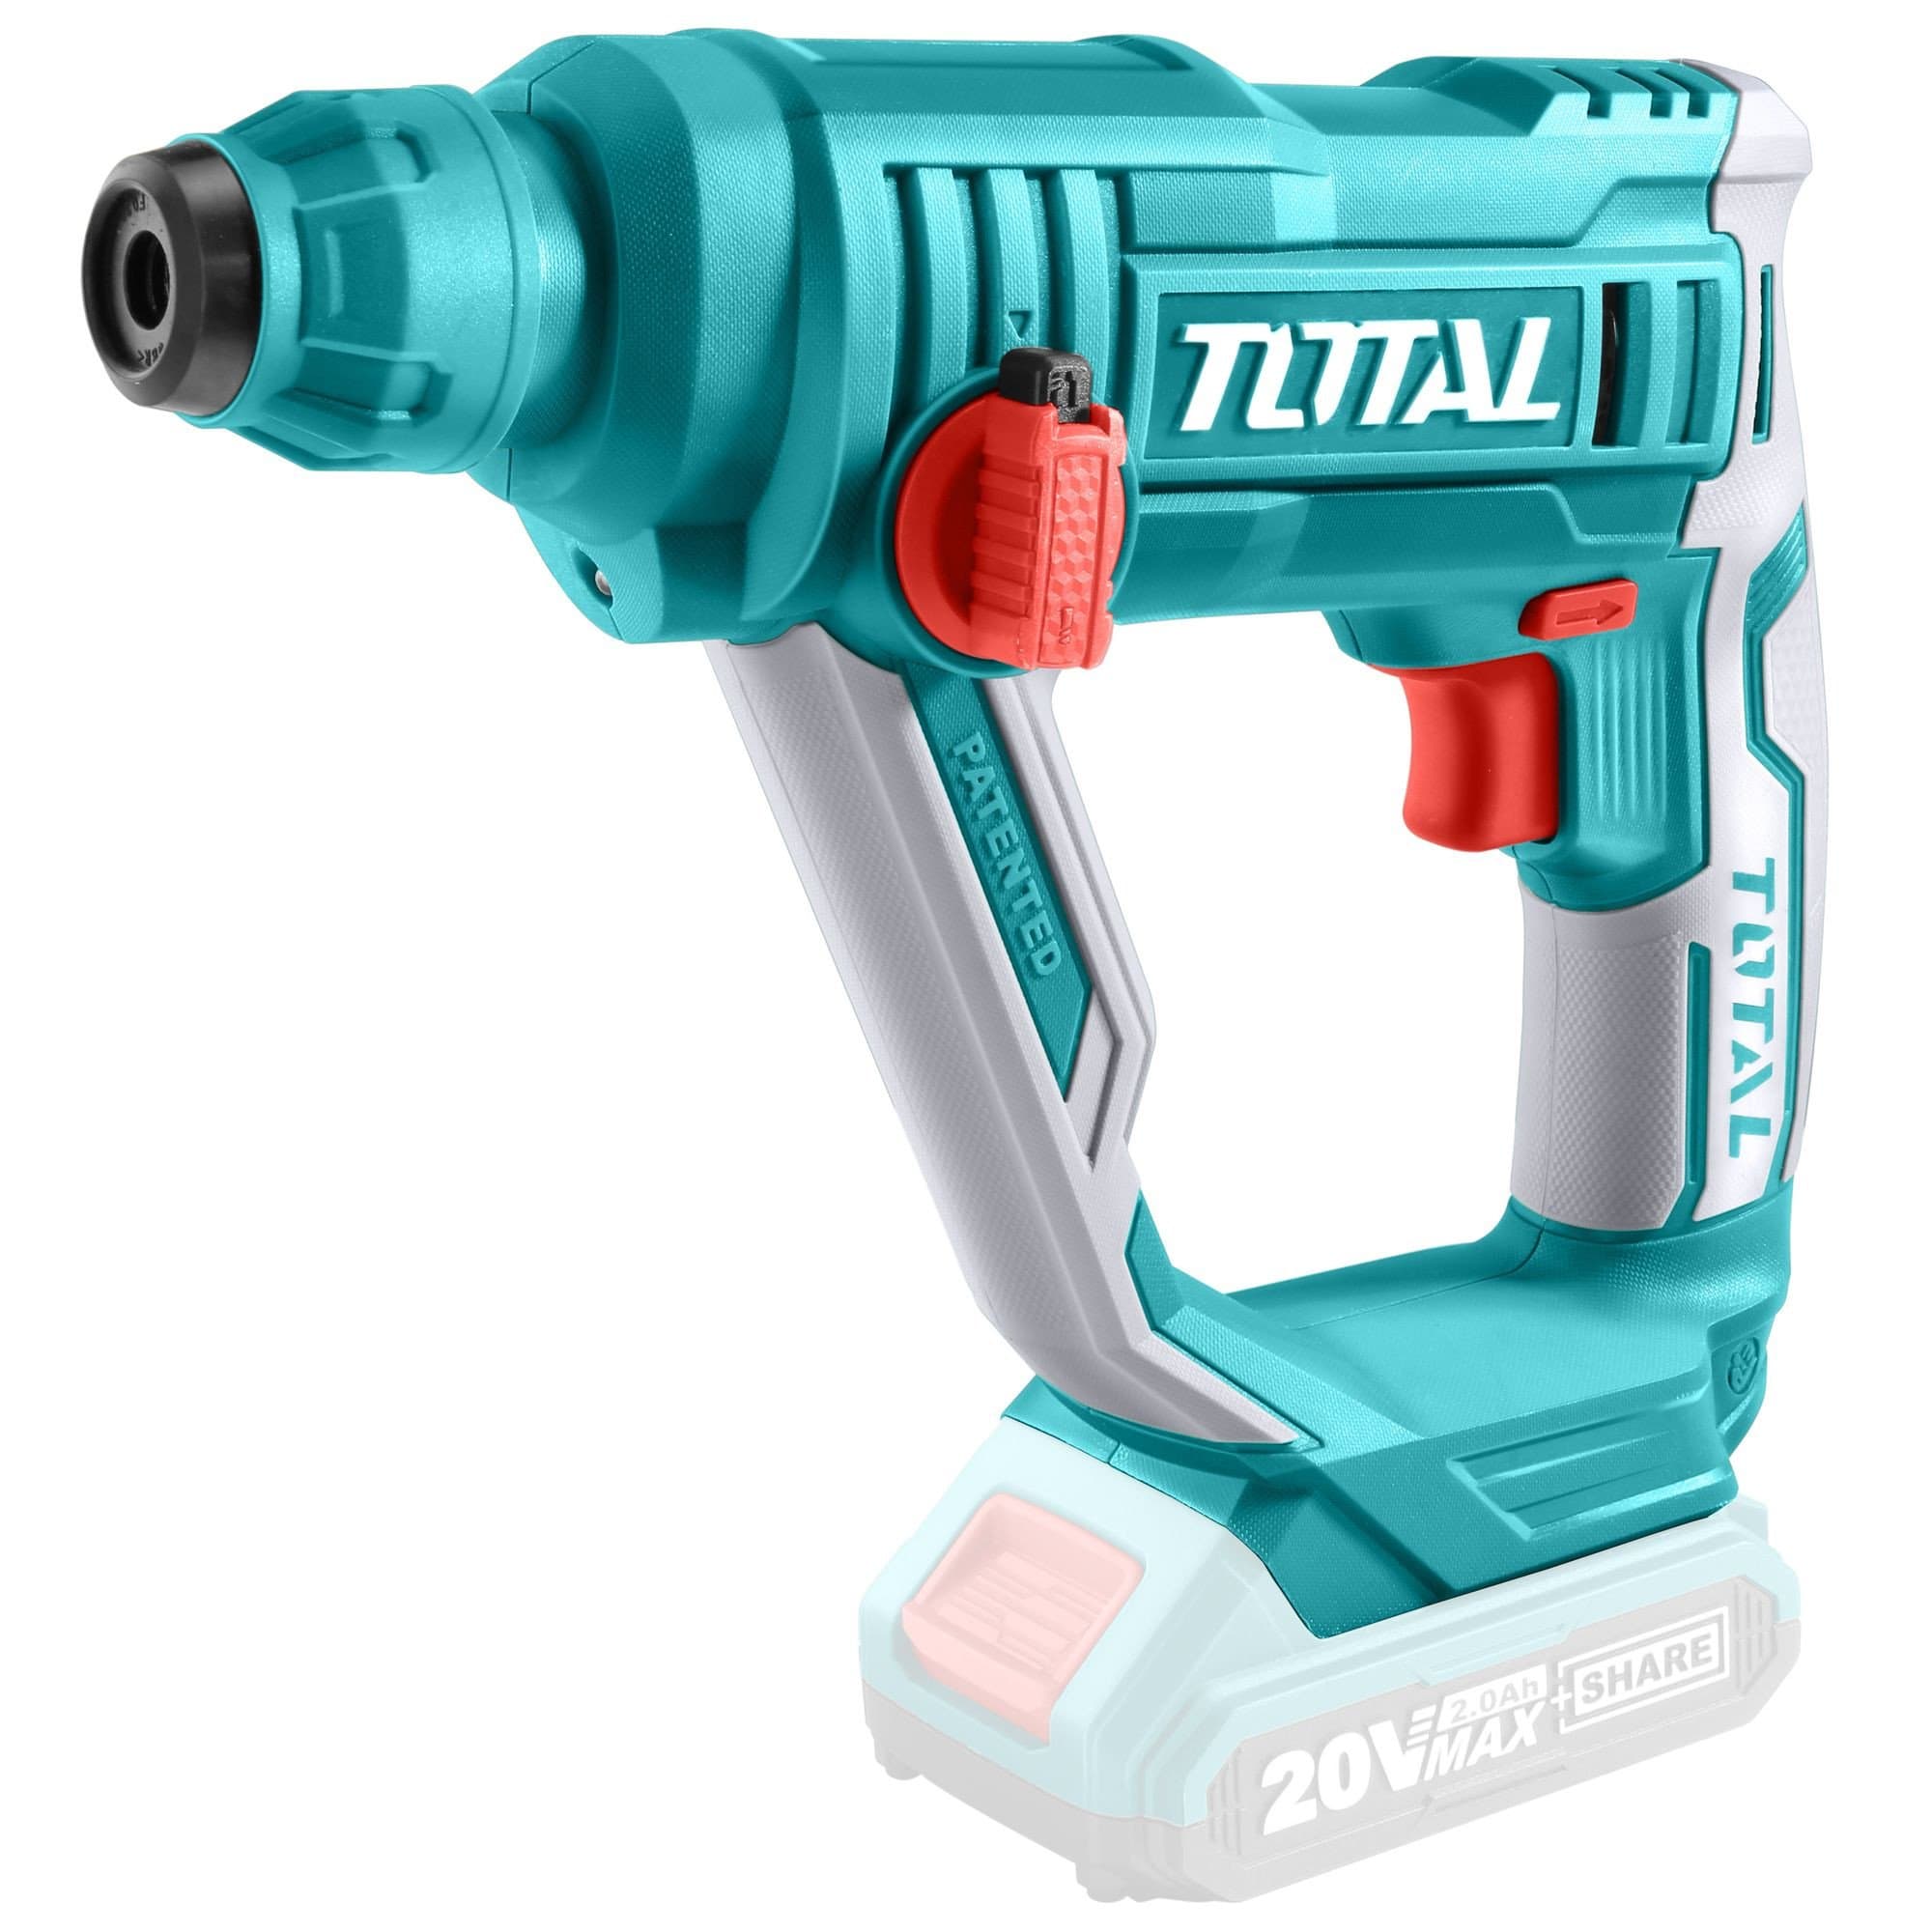 Total Lithium-ion Cordless Rotary Hammer 20V - TRHLI1601 | Supply Master | Accra, Ghana Tools With 20V Battery & Charger Building Steel Engineering Hardware tool